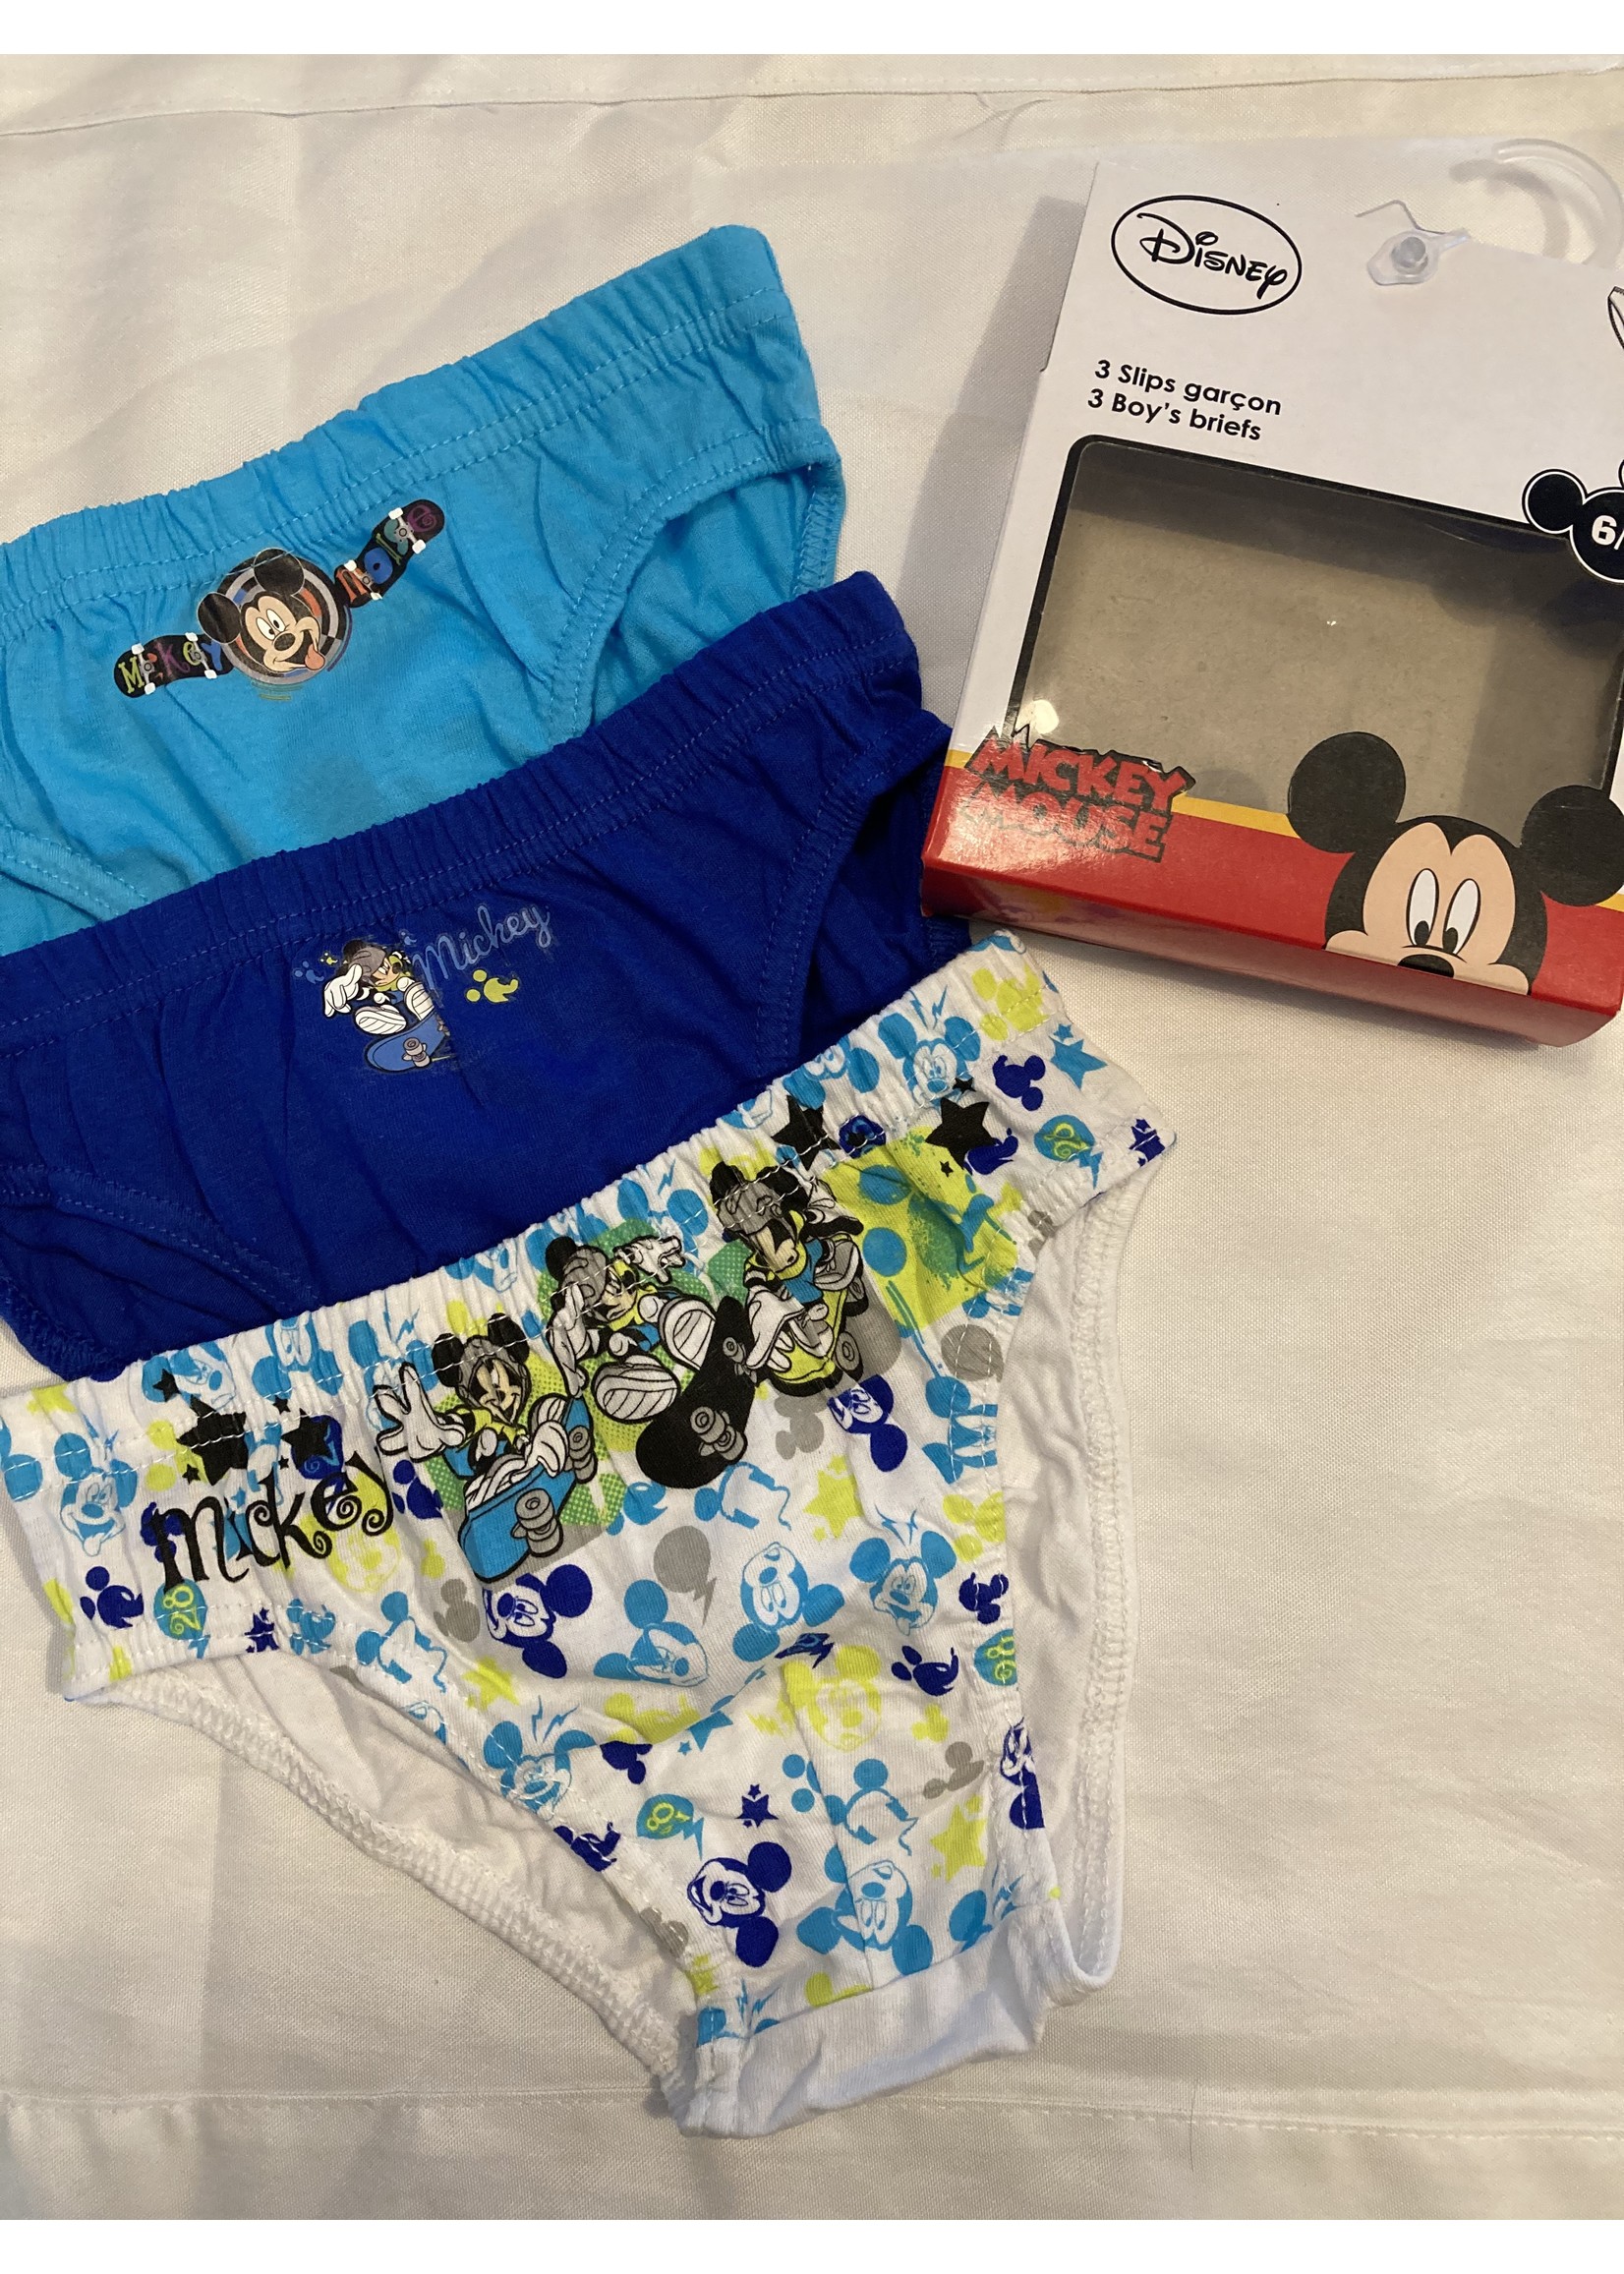 Mickey Mouse briefs from Disney 3 pack 